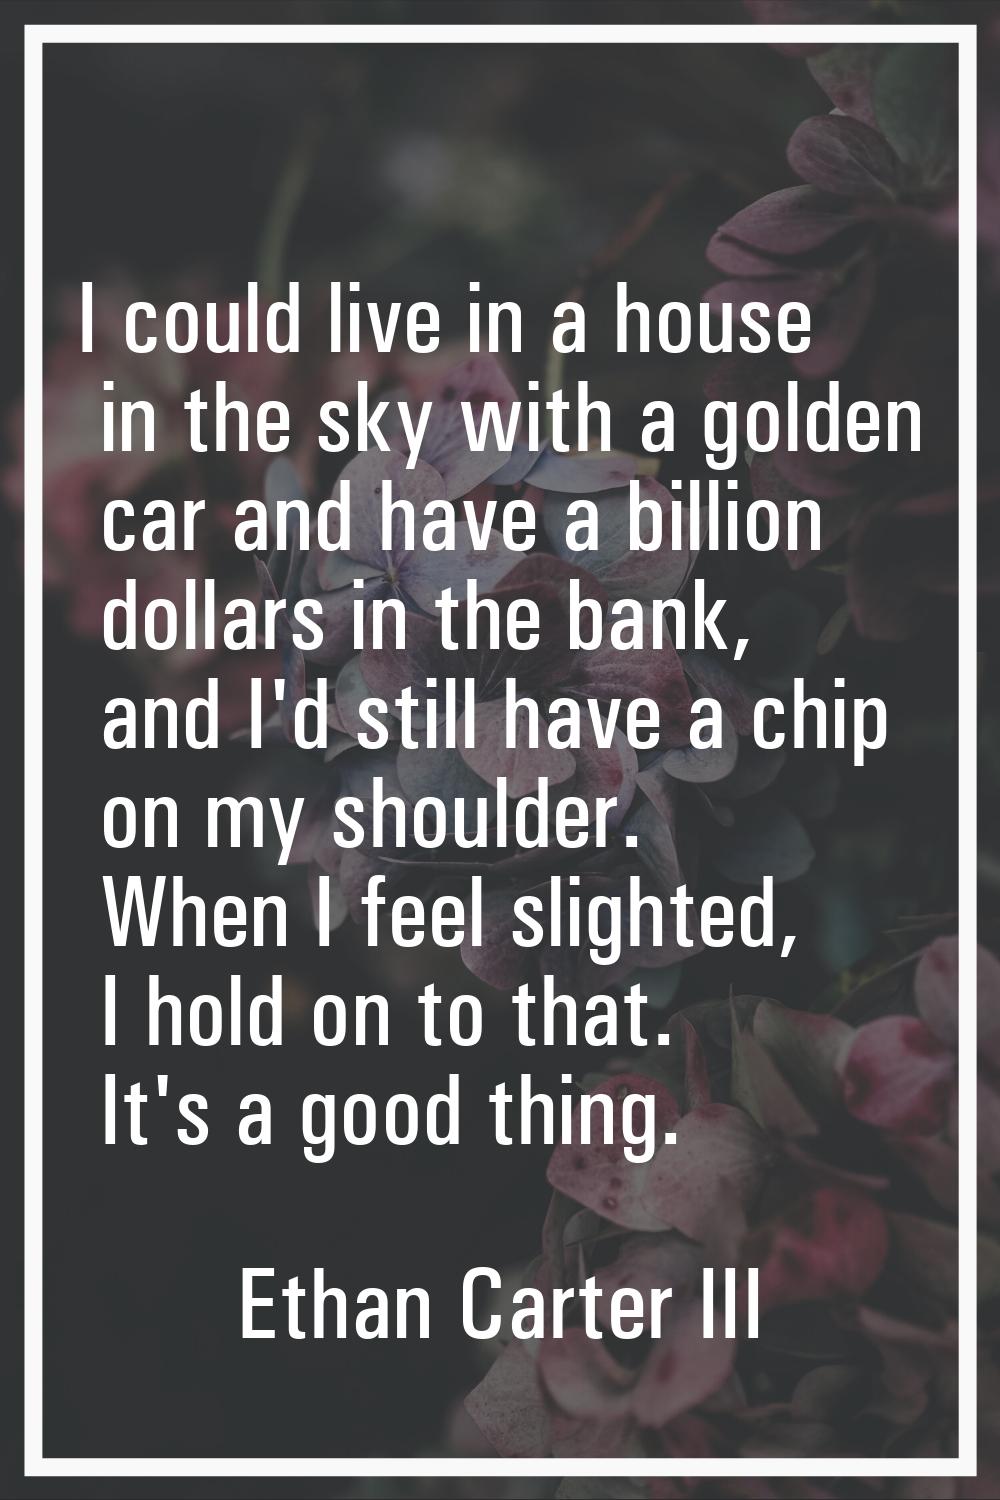 I could live in a house in the sky with a golden car and have a billion dollars in the bank, and I'